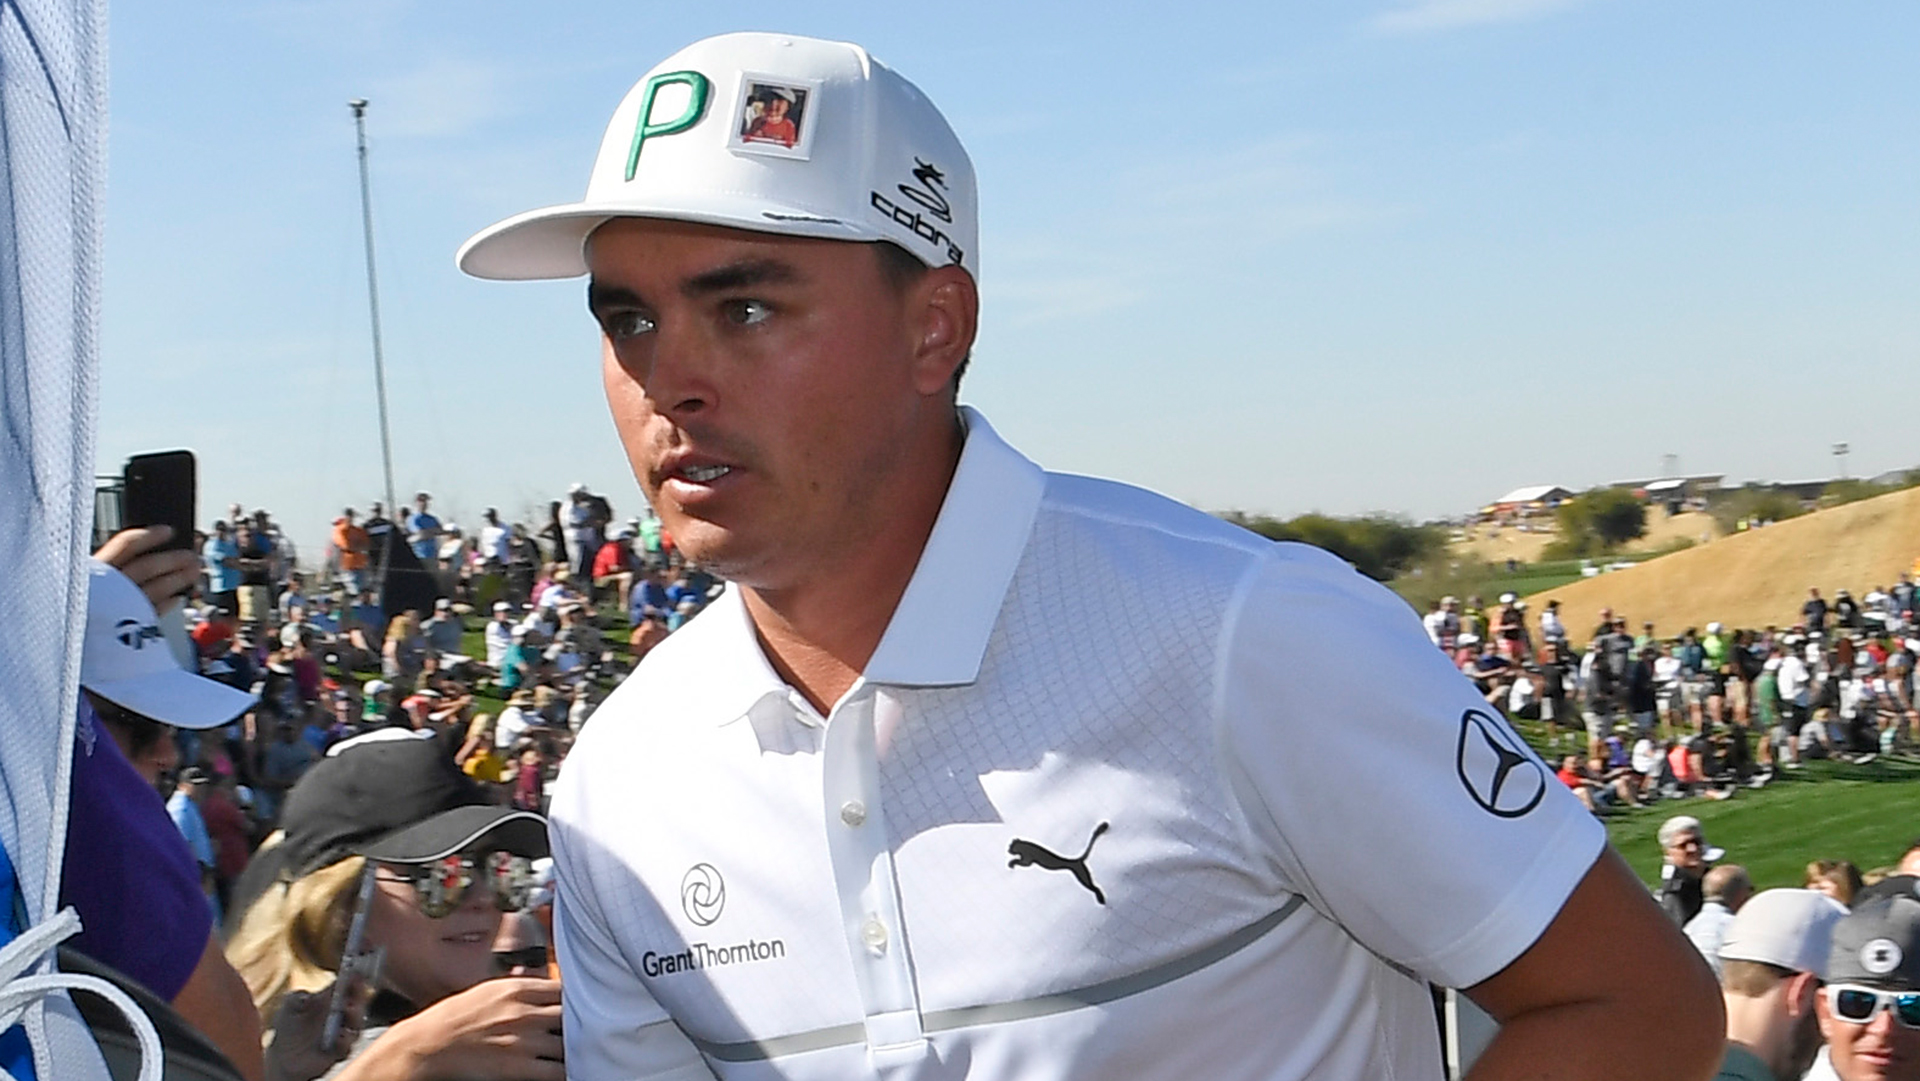 duck logo on Rickie Fowler's hat 